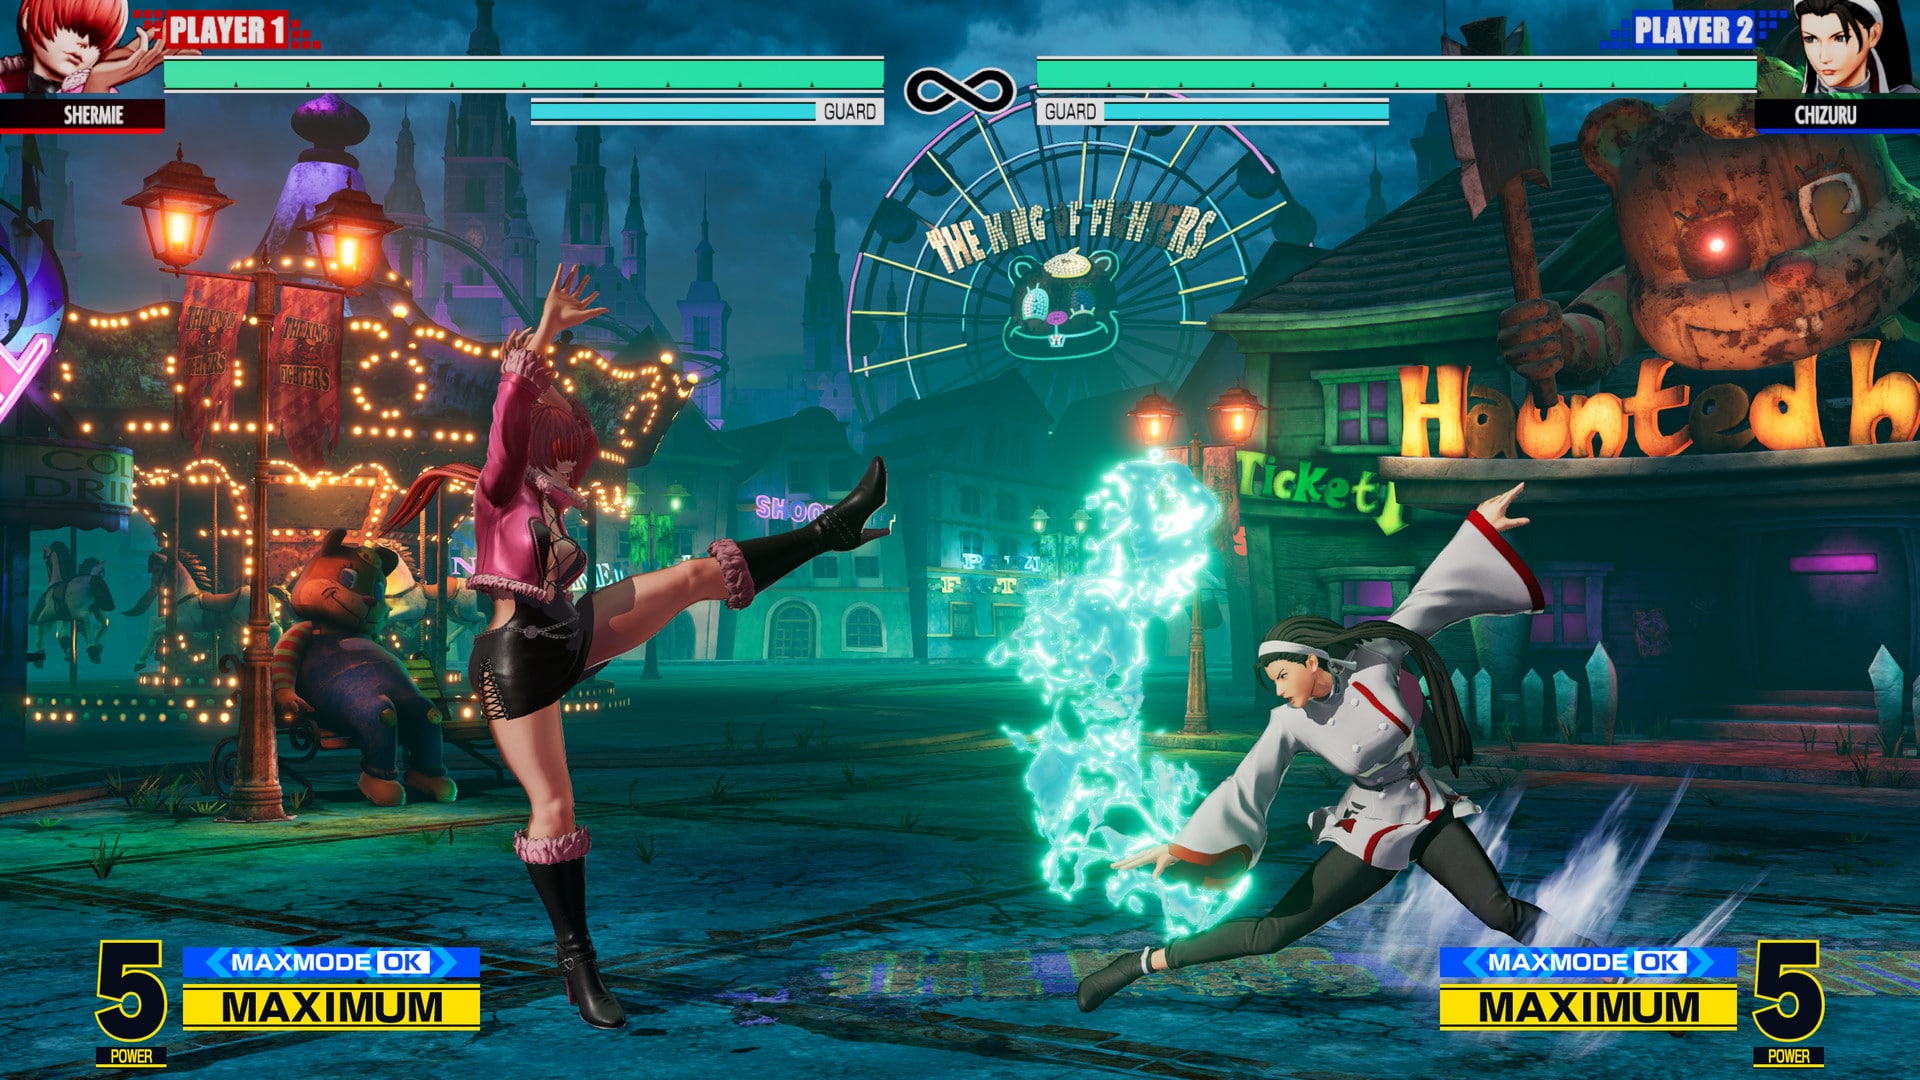 King of Fighters 15 Update 1.02